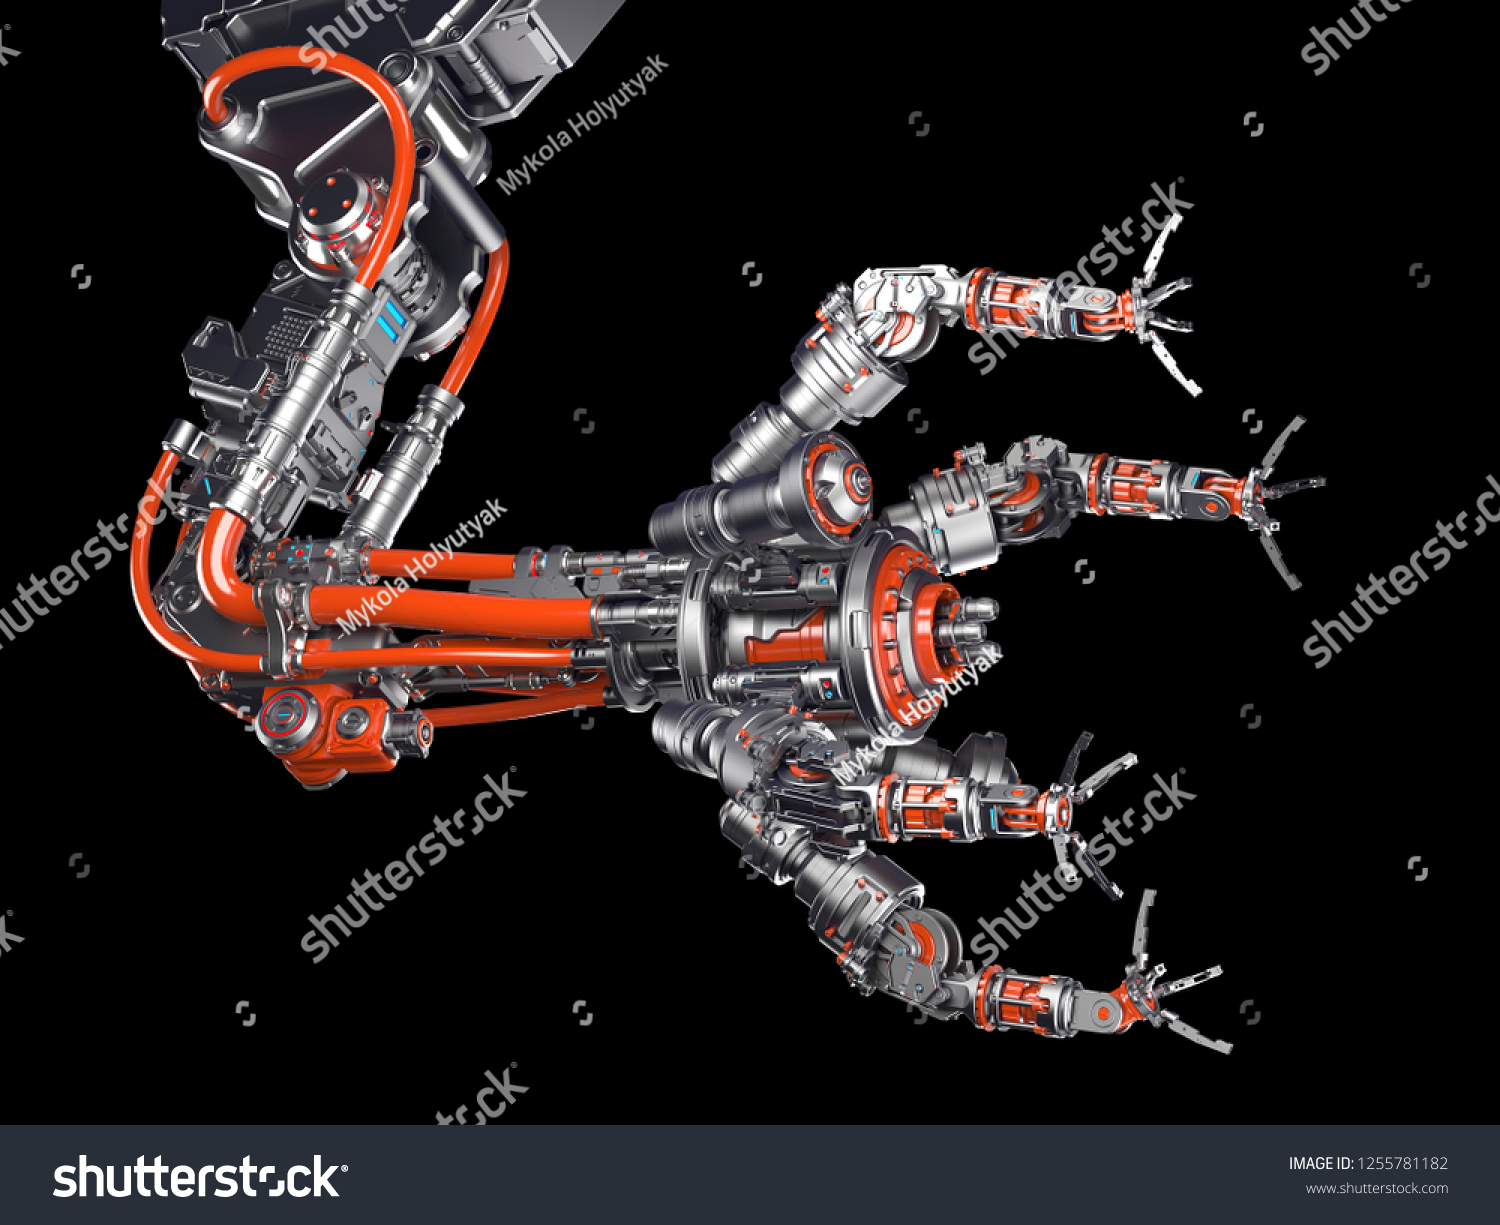 Assembly Robot Construction Arm Industrial Robot Stock Illustration 1255781182